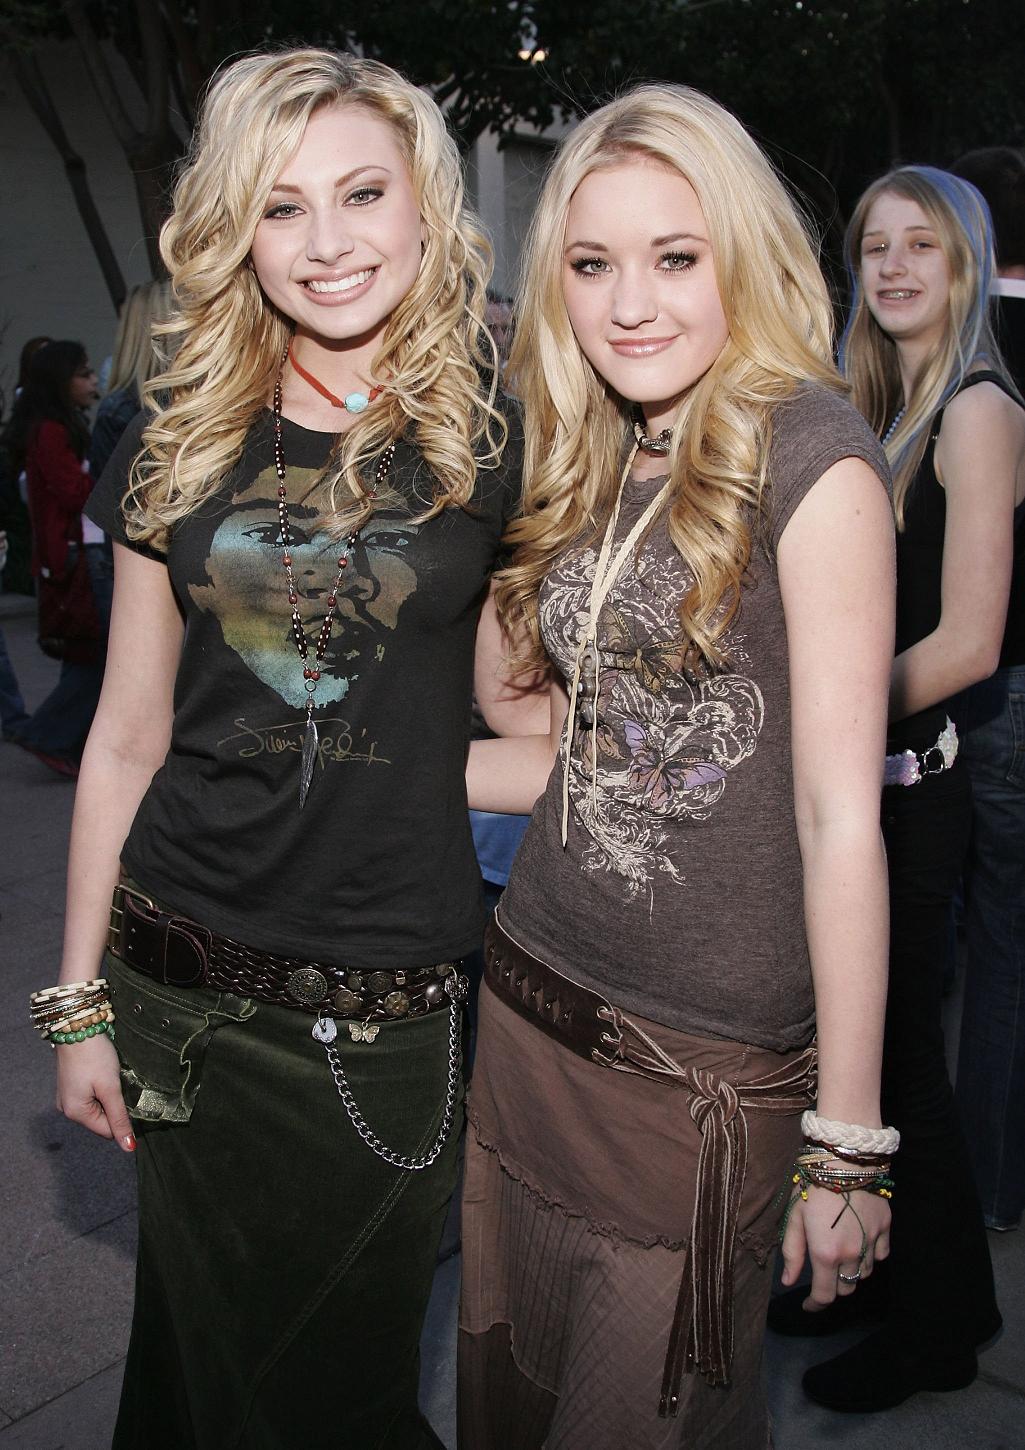 Aly and Aj photo 1004 of 1589 pics, wallpaper - photo #461915 - ThePlace2